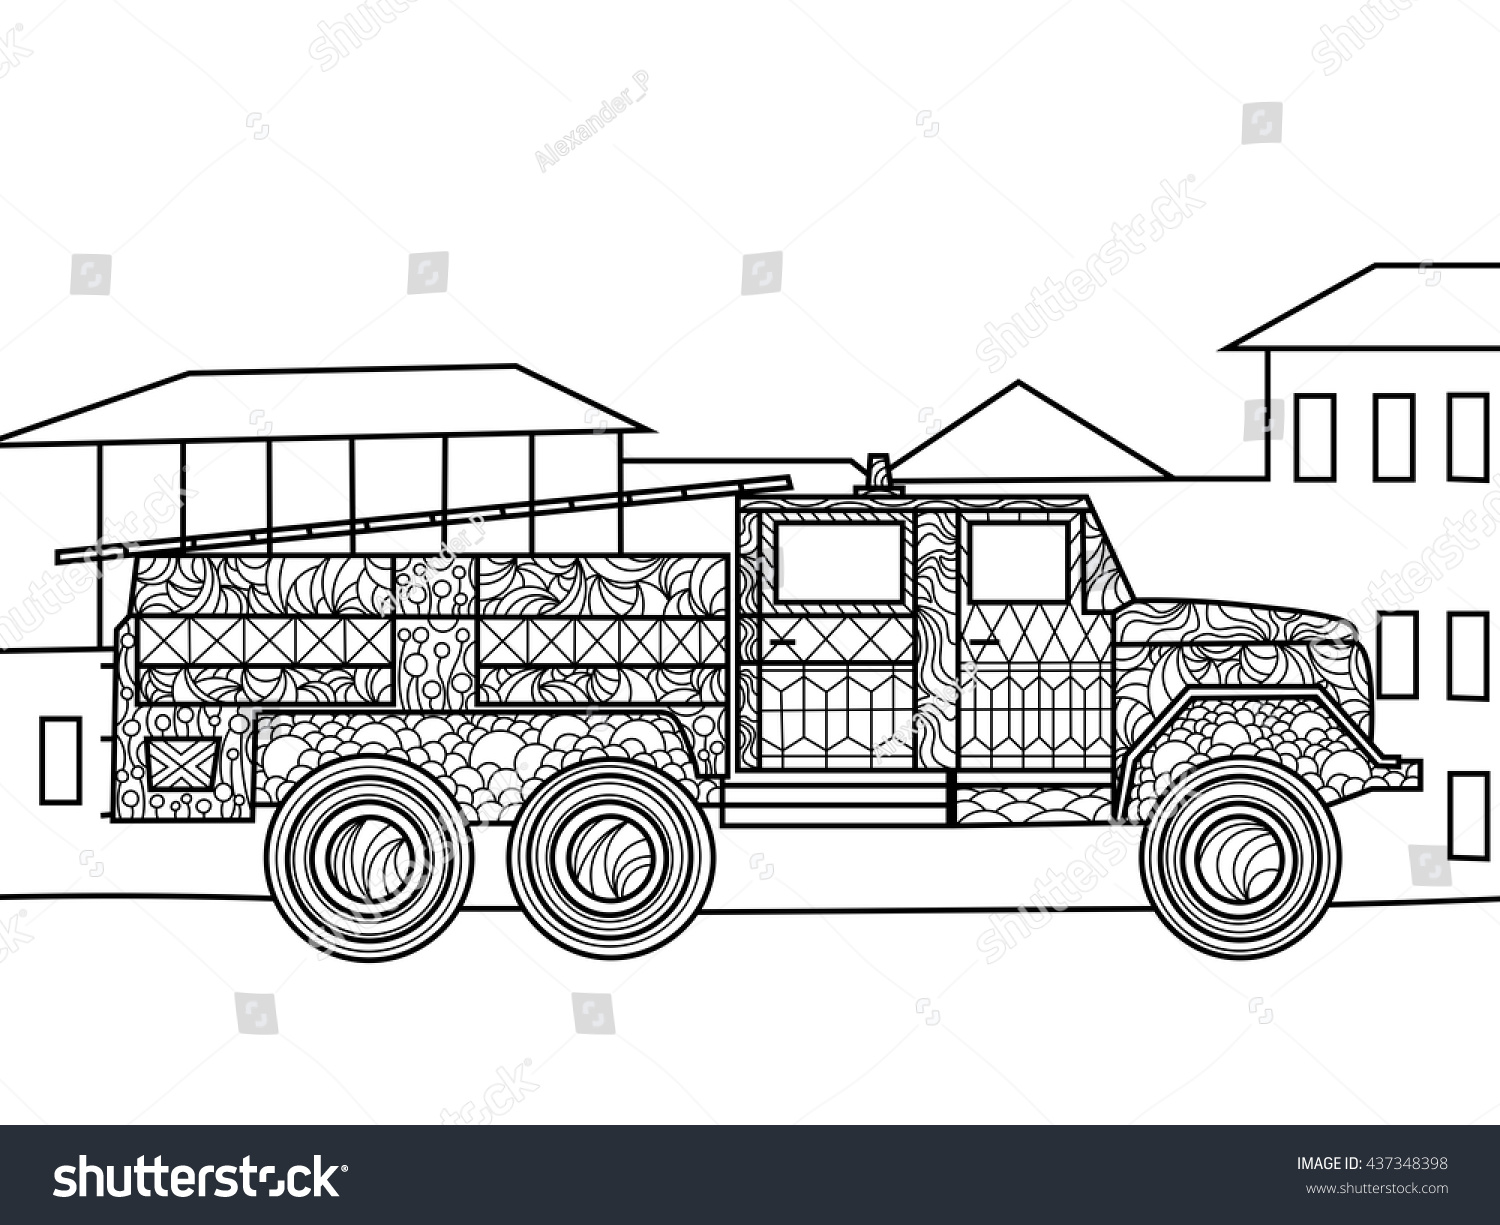 garbage truck coloring pages mcneilus - photo #36